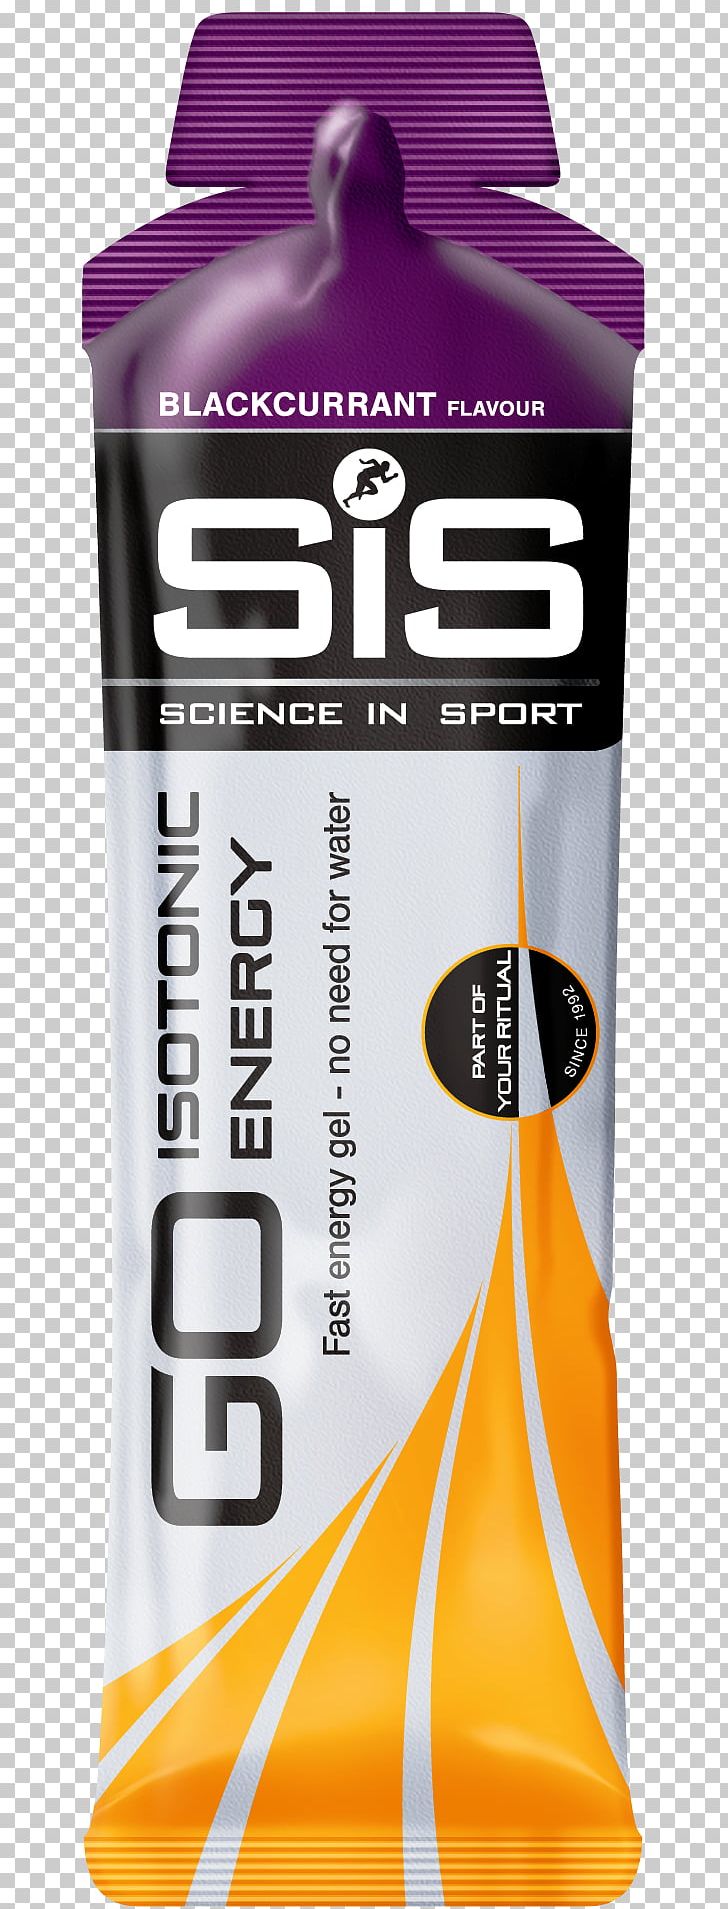 Energy Gel Sports & Energy Drinks GU Energy Labs Food Energy PNG, Clipart, Blackcurrant, Brand, Caffeine, Carbohydrate, Cycling Free PNG Download